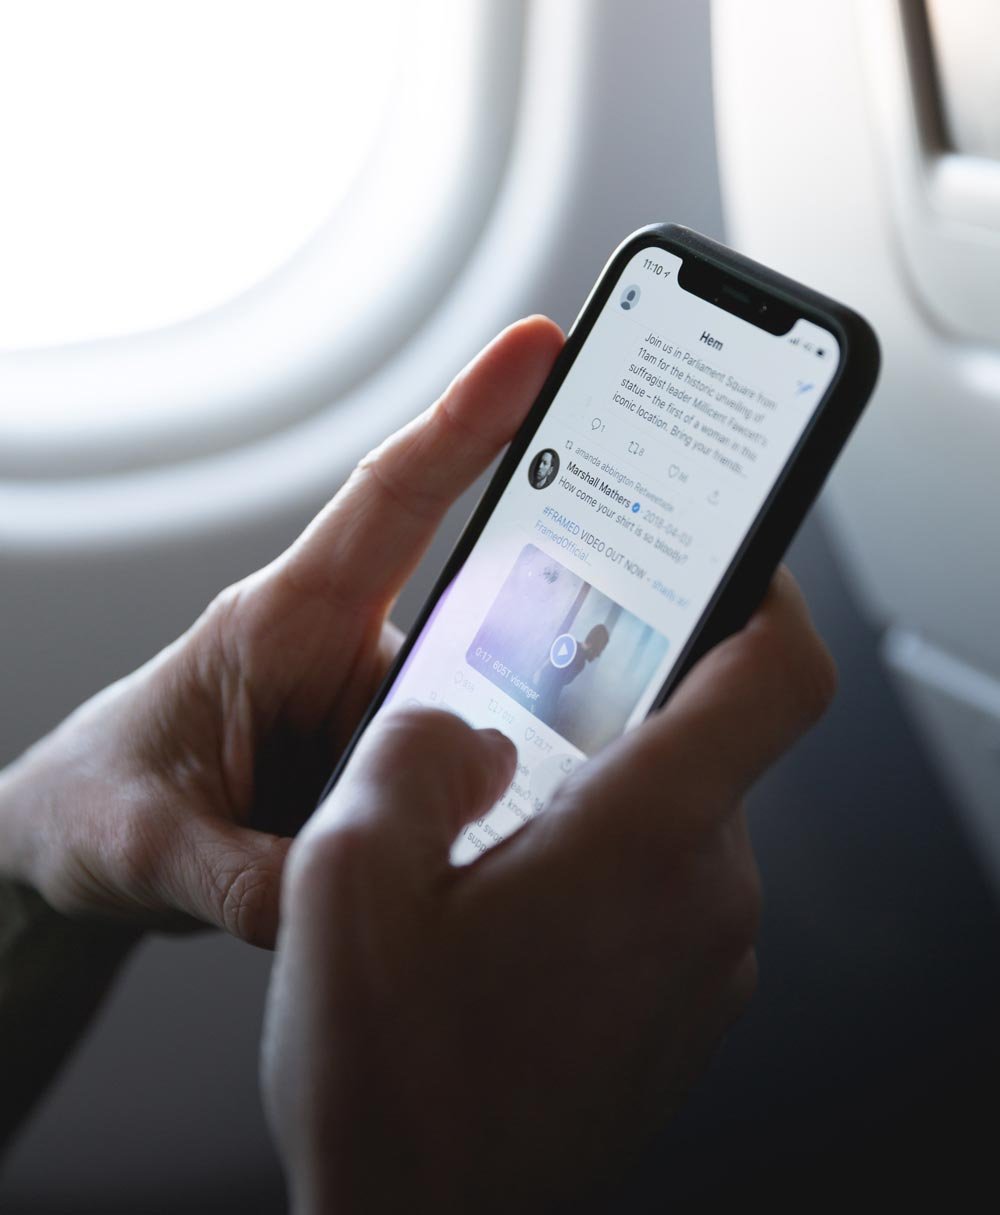 An individual on an airplane, cradling a smartphone in their hands. On the screen, vibrant icons of various social media platforms display recent updates, signifying their connection with the digital world even while in transit.